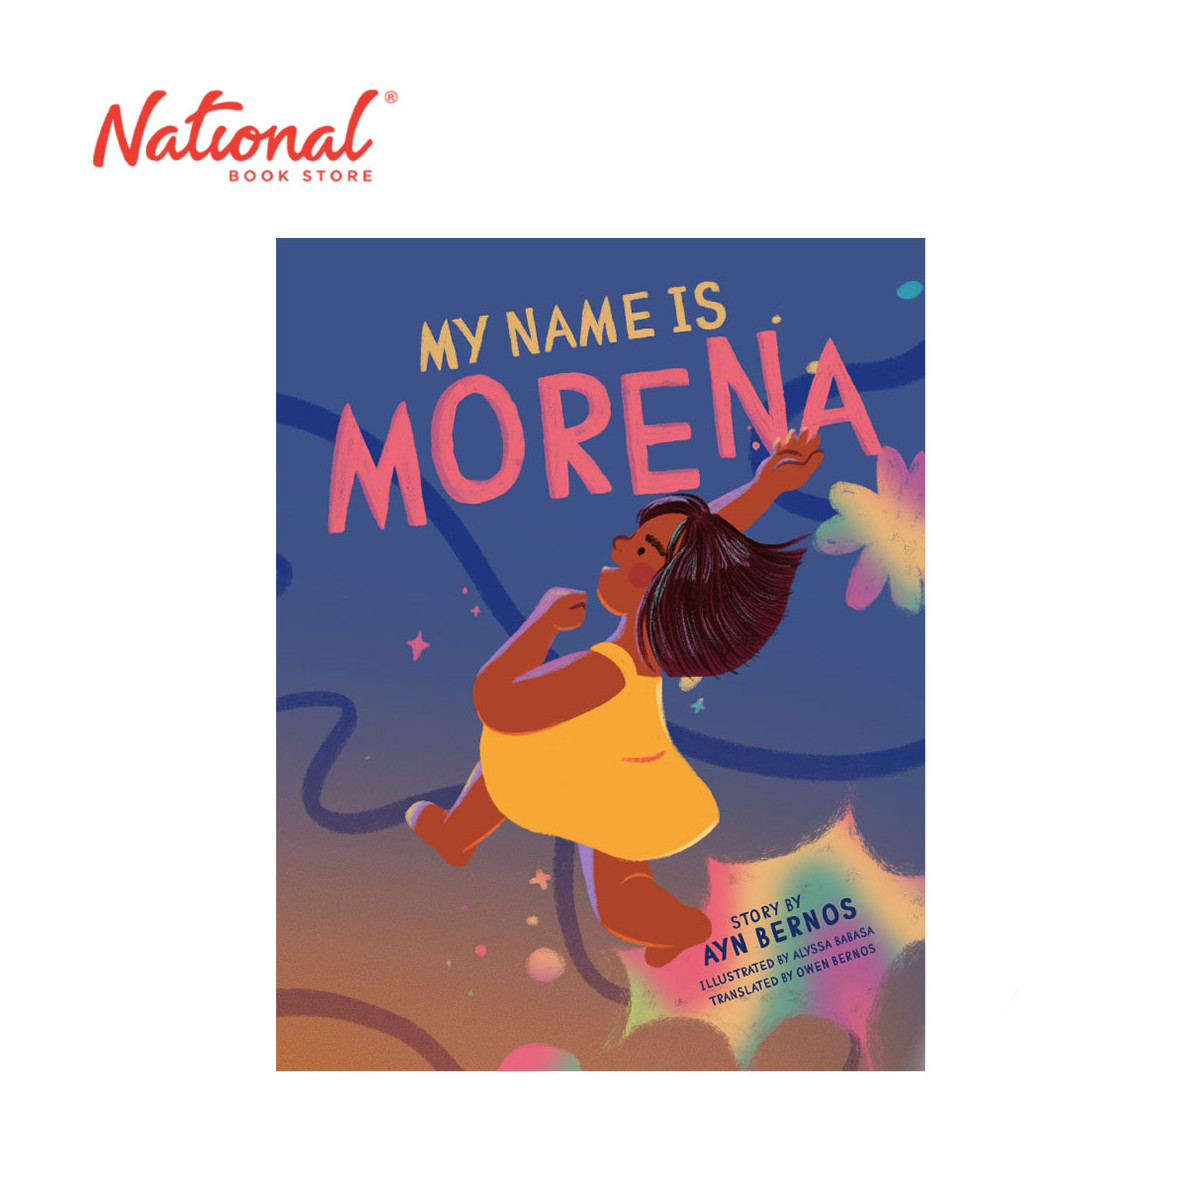 My Name Is Morena By Ayn Bernos - Trade Paperback - Storybooks for Kids